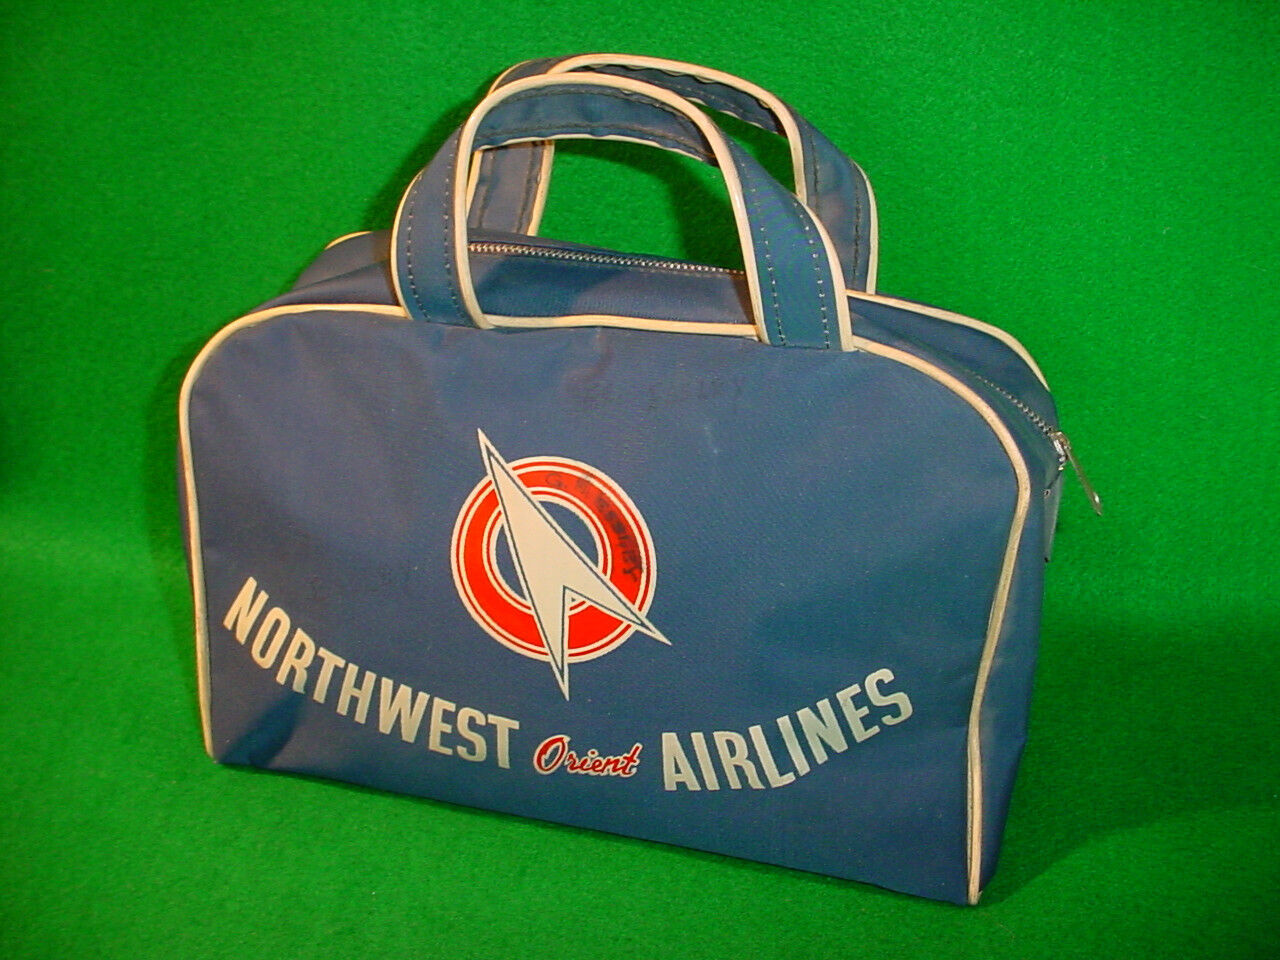 Vintage Northwest Orient Airlines Small Travel Bag